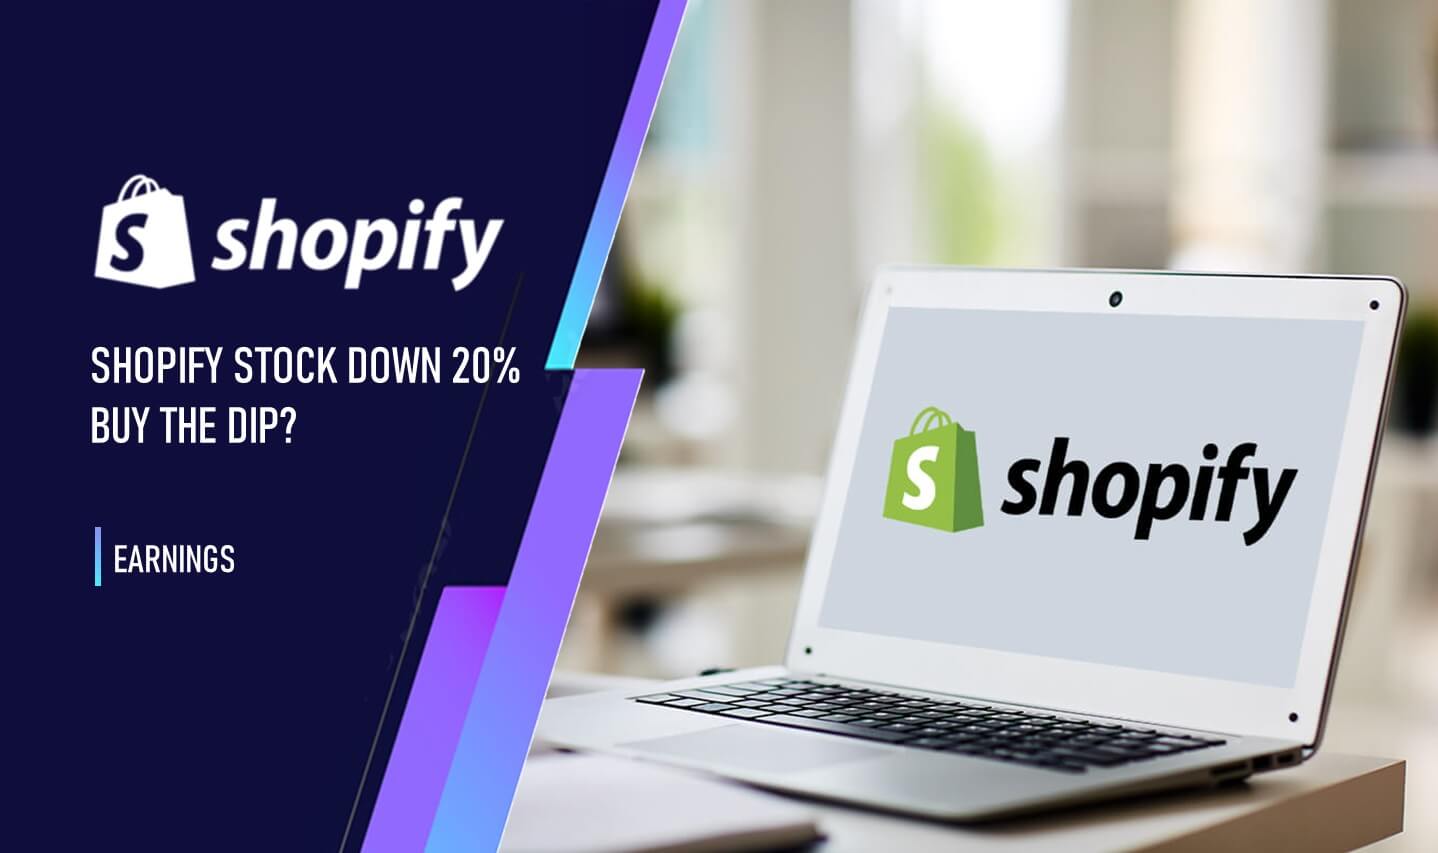 shopify stock buy opportunity Picture